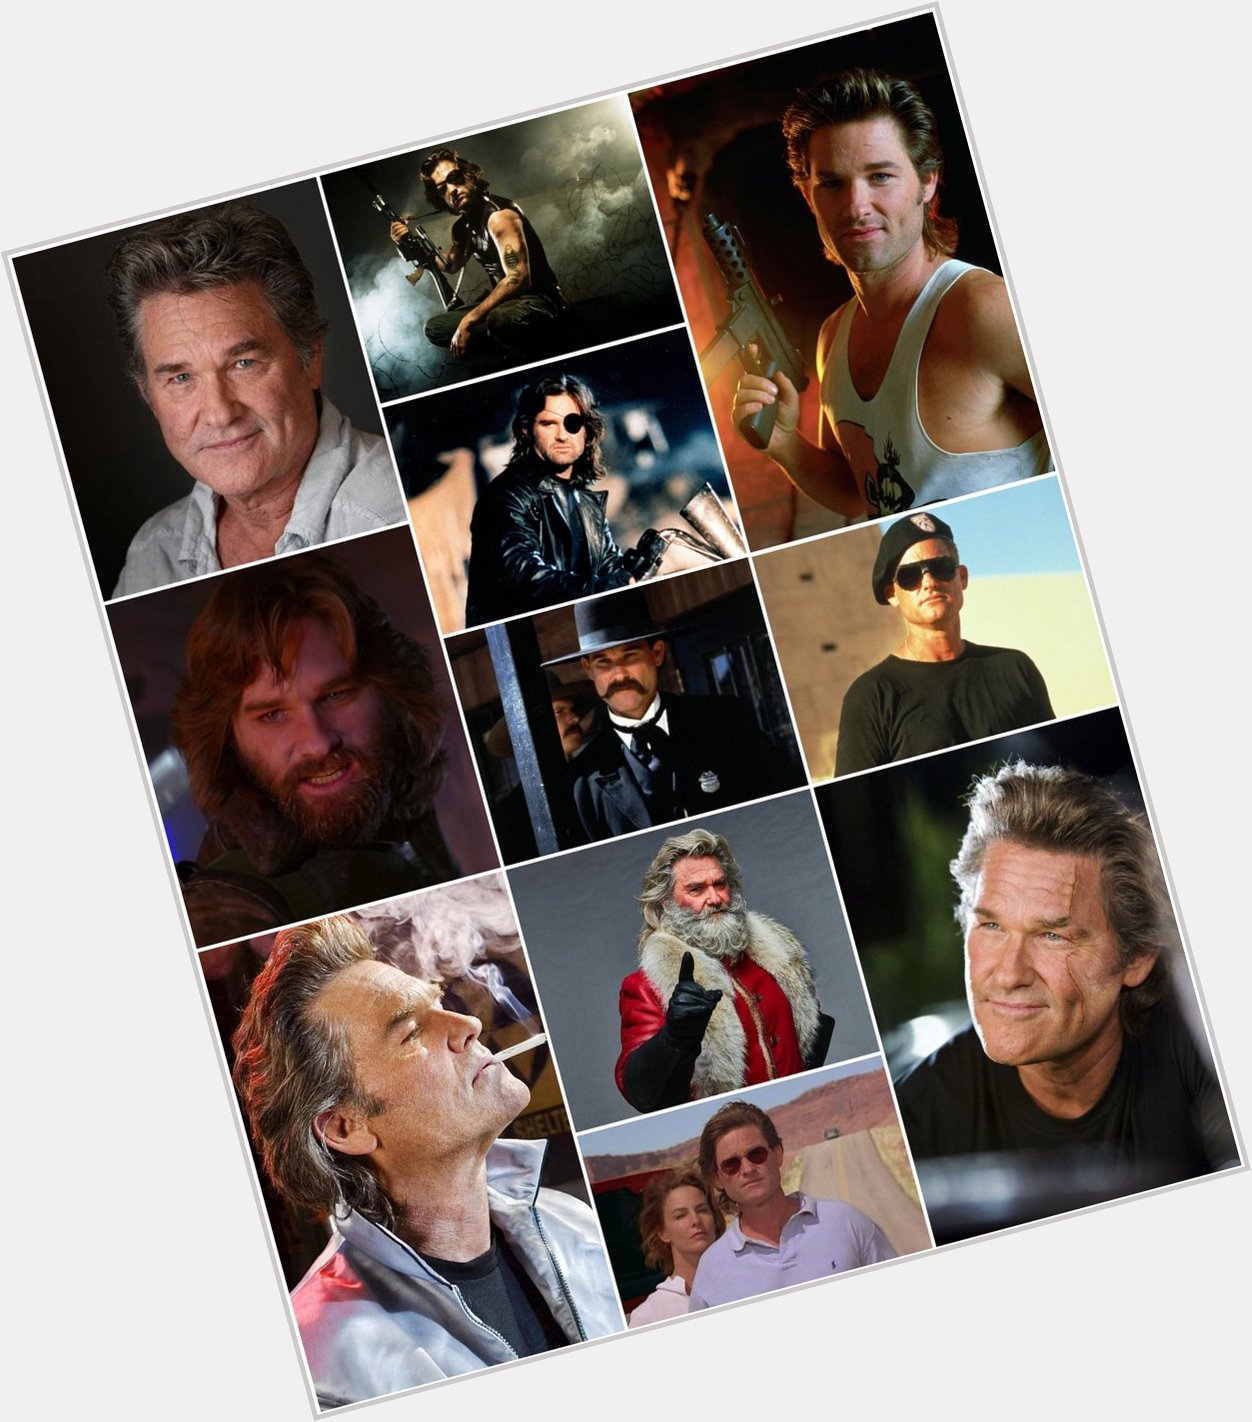 Happy Birthday to one of my all-time favorite actors Kurt Russell. 